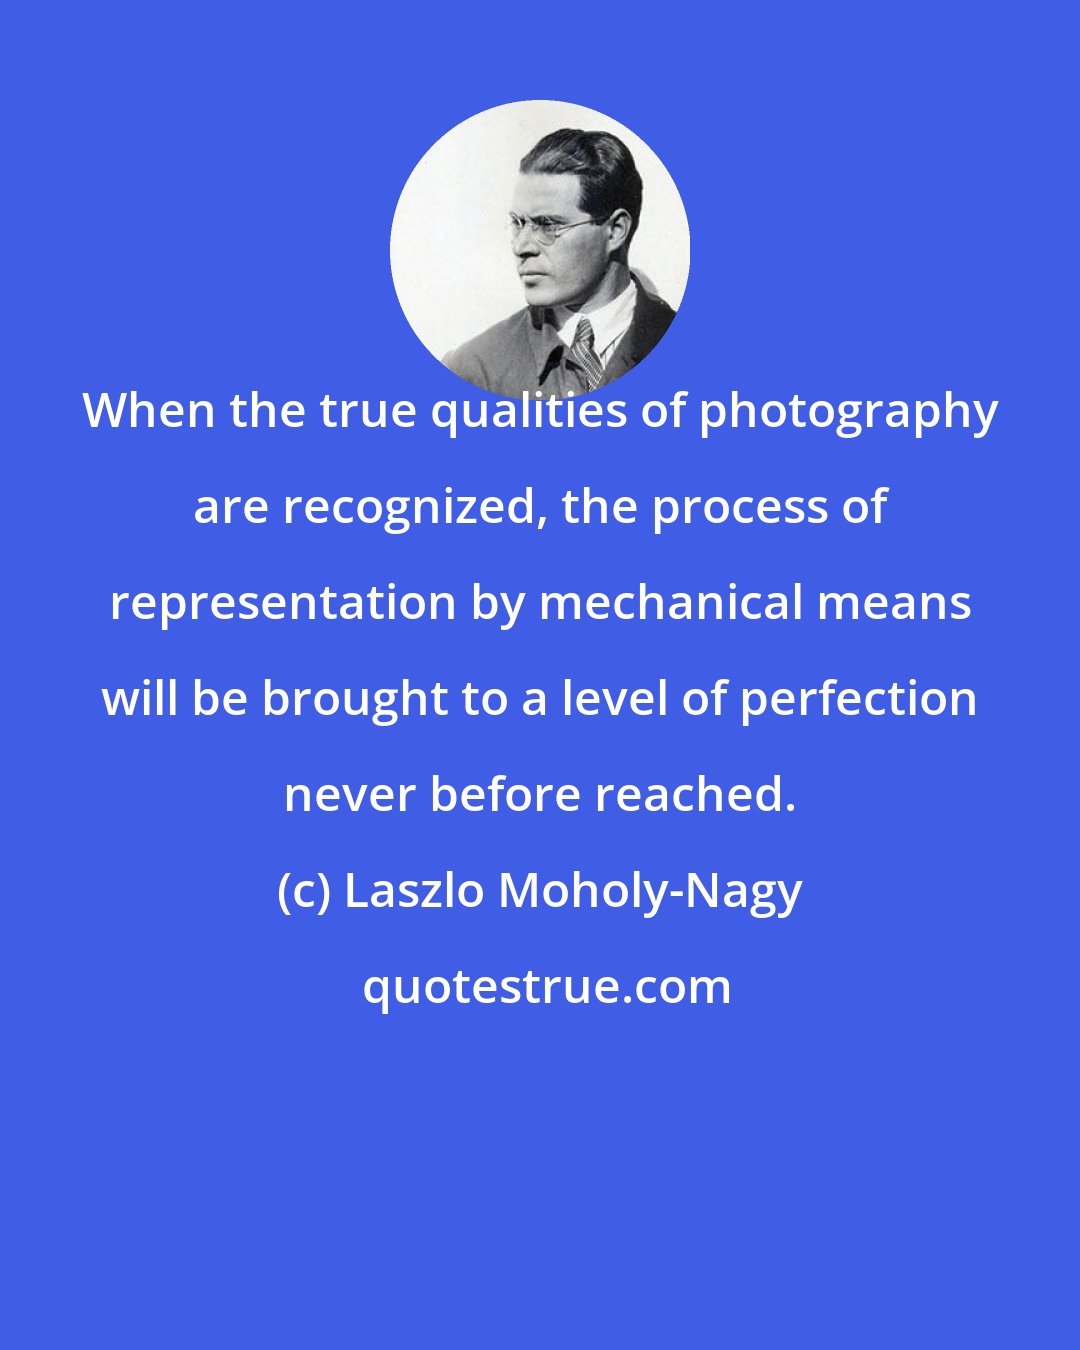 Laszlo Moholy-Nagy: When the true qualities of photography are recognized, the process of representation by mechanical means will be brought to a level of perfection never before reached.